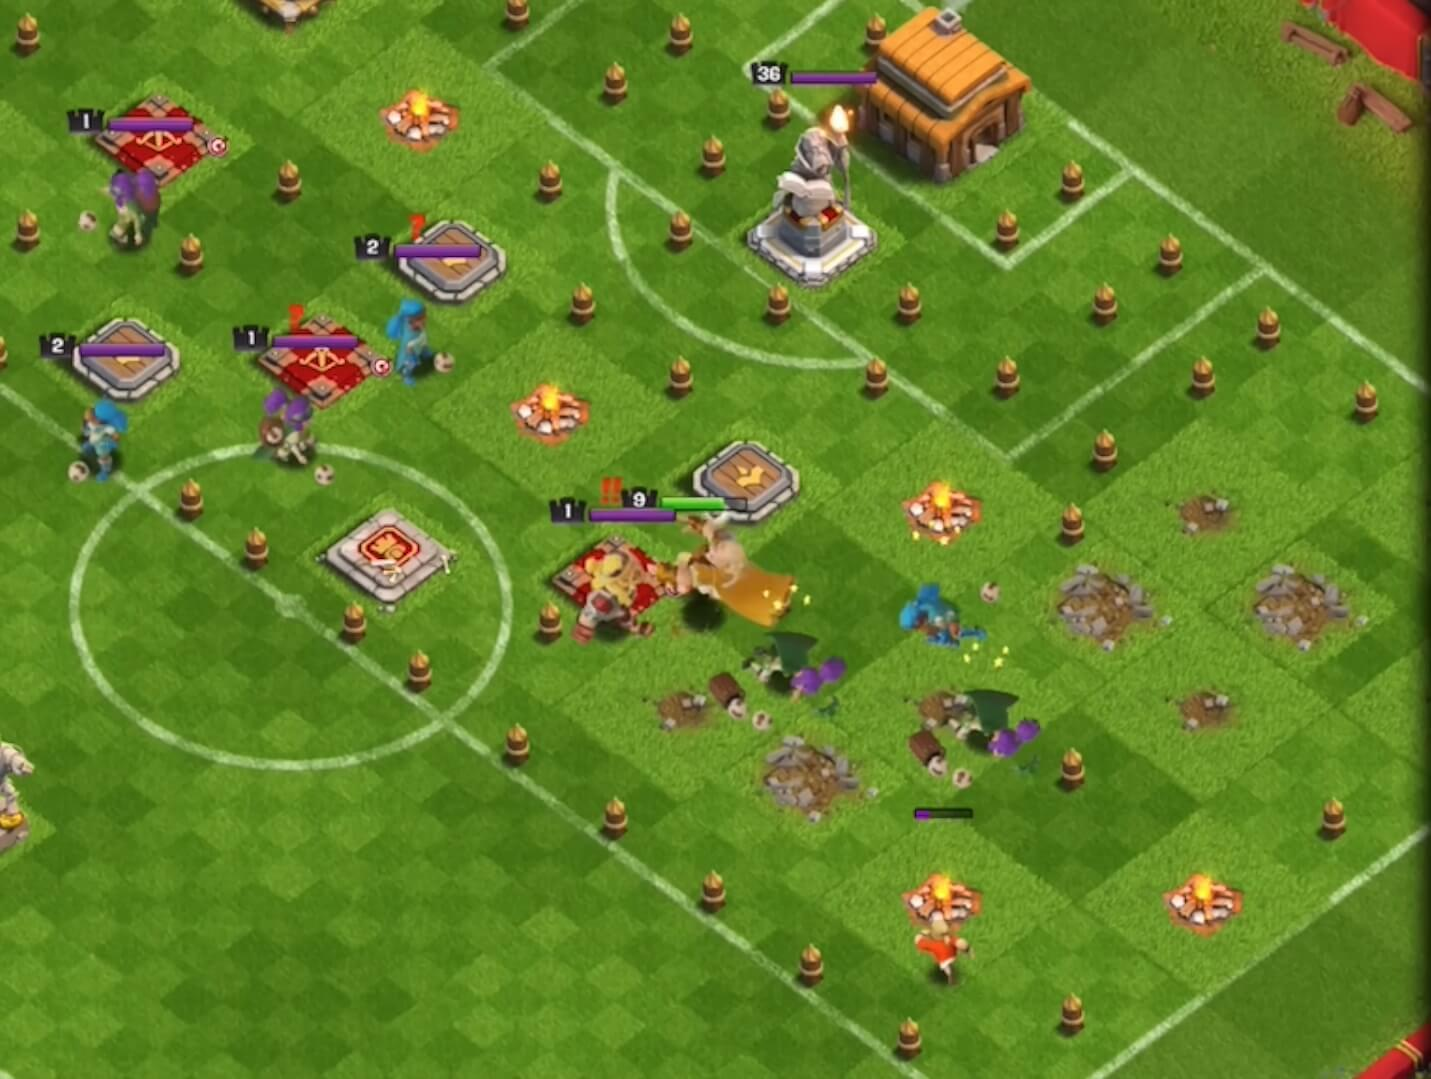 preparation for coc 4-4-2 formation challenge